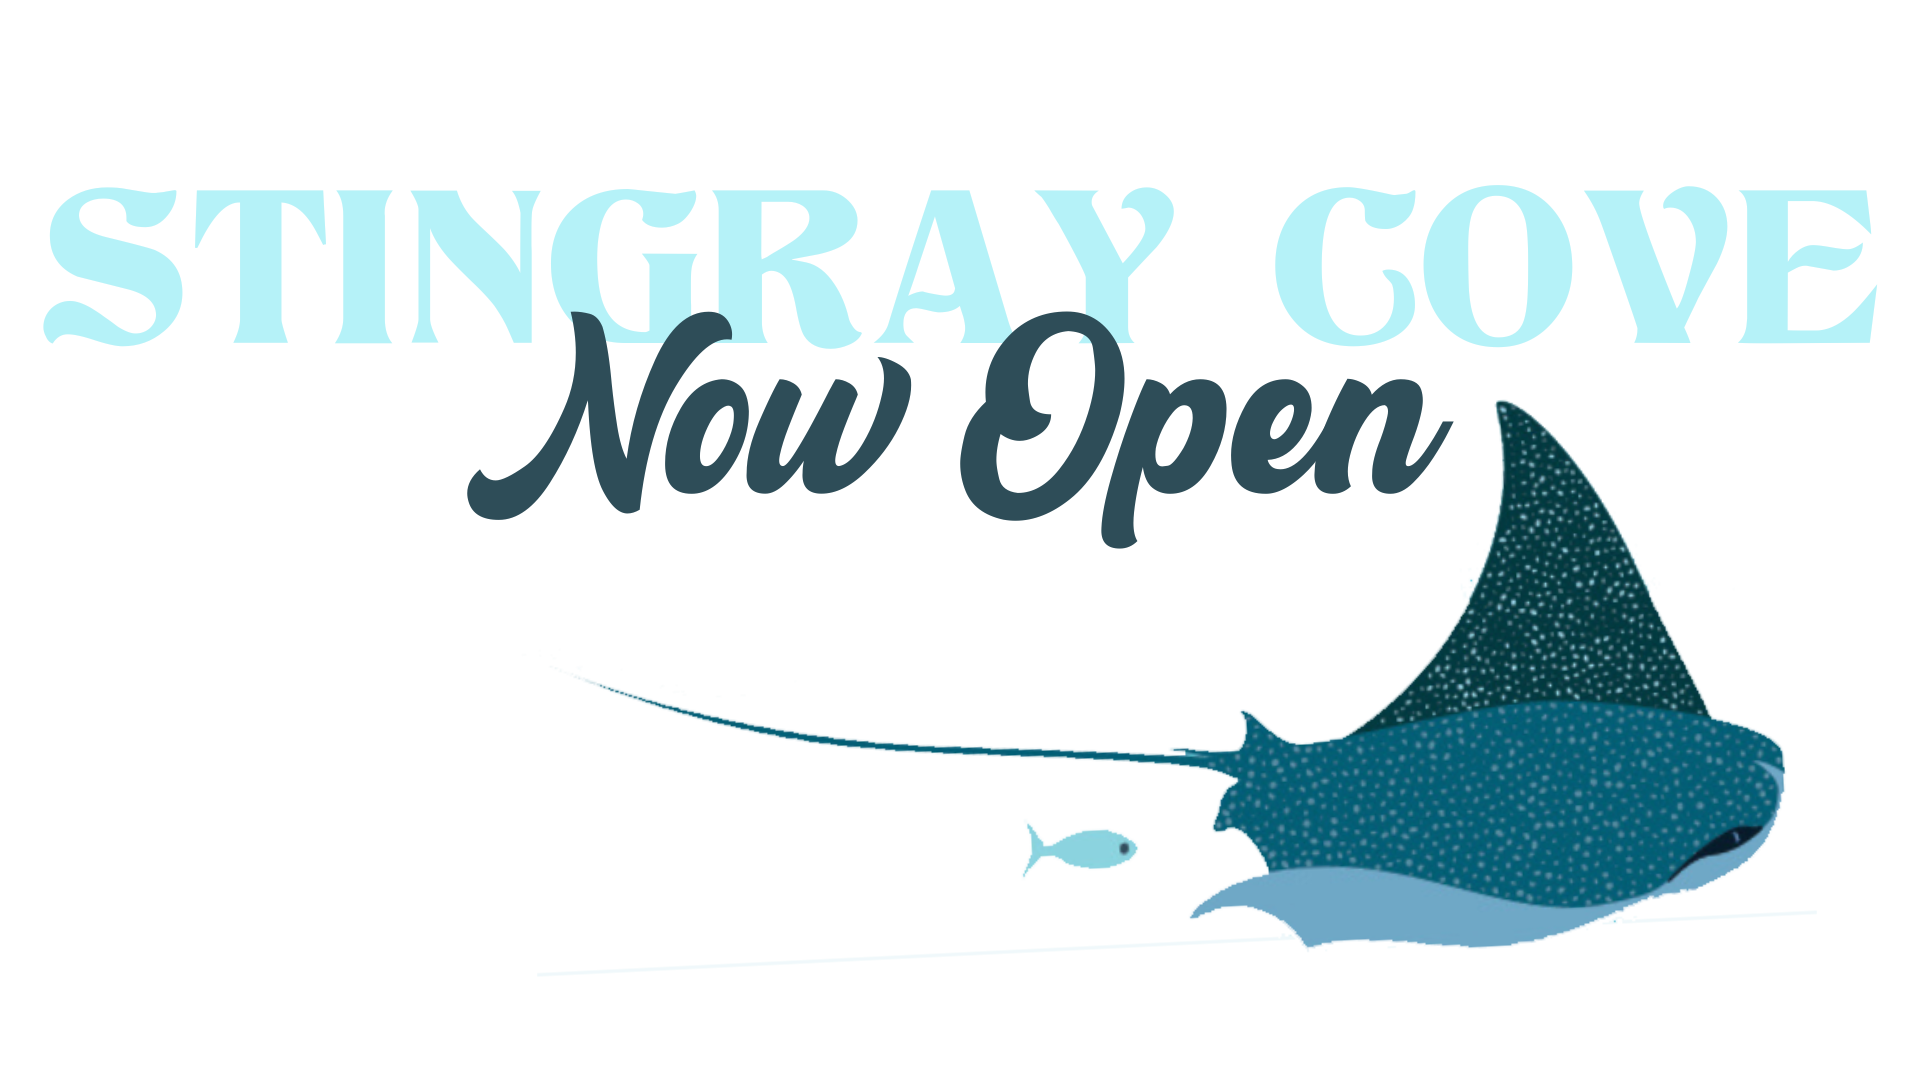 Stingray Cove is NOW OPEN!